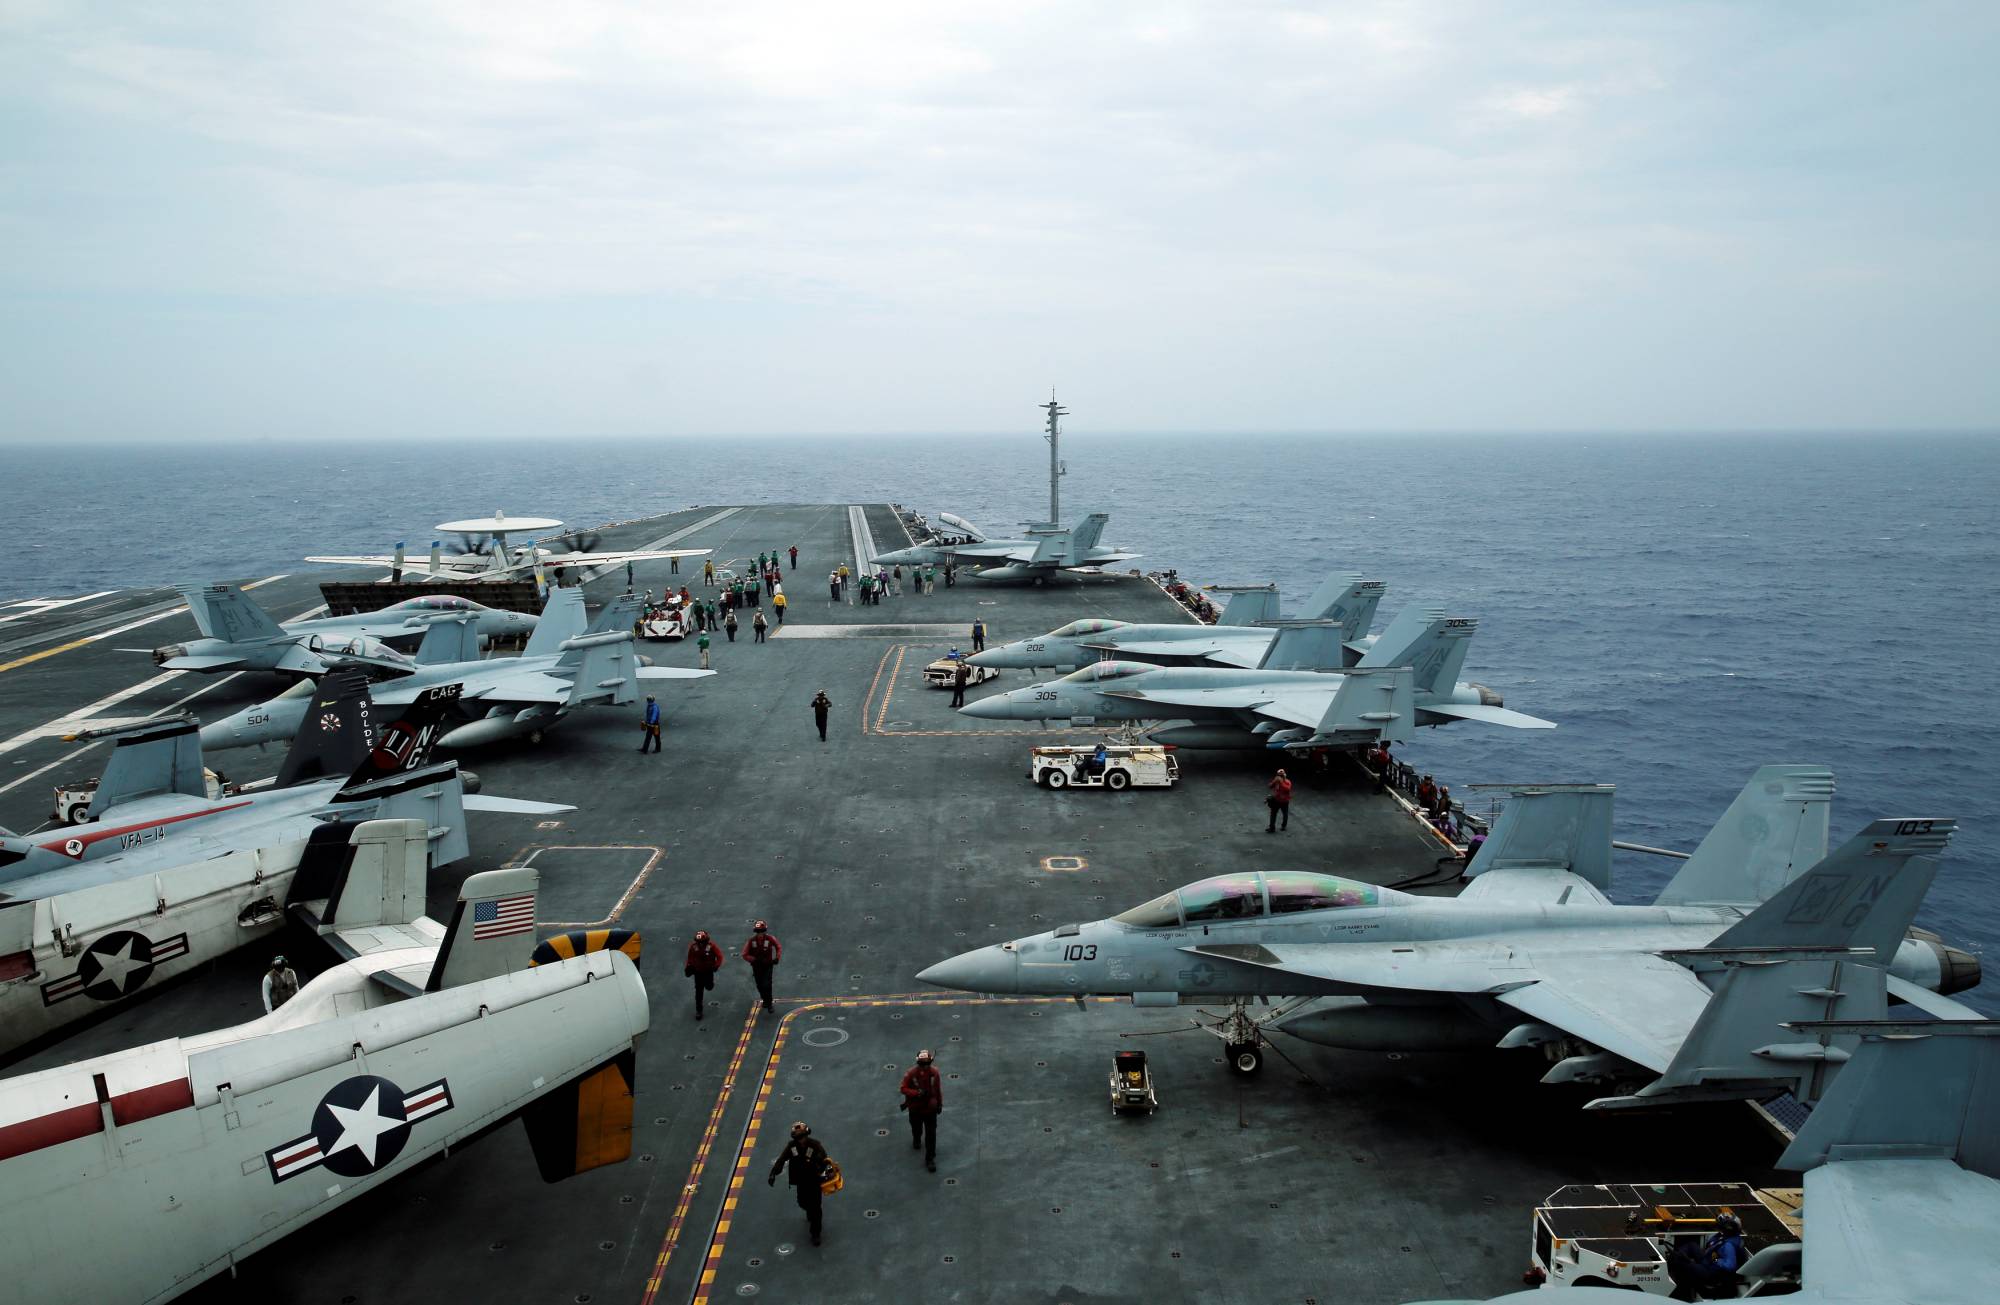 F/A-18 Hornet fighter jets and E-2D Hawkeye plane are seen on the U.S. aircraft carrier John C. Stennis during the Malabar joint military exercises off Okinawa Prefecture in June 2016. | REUTERS